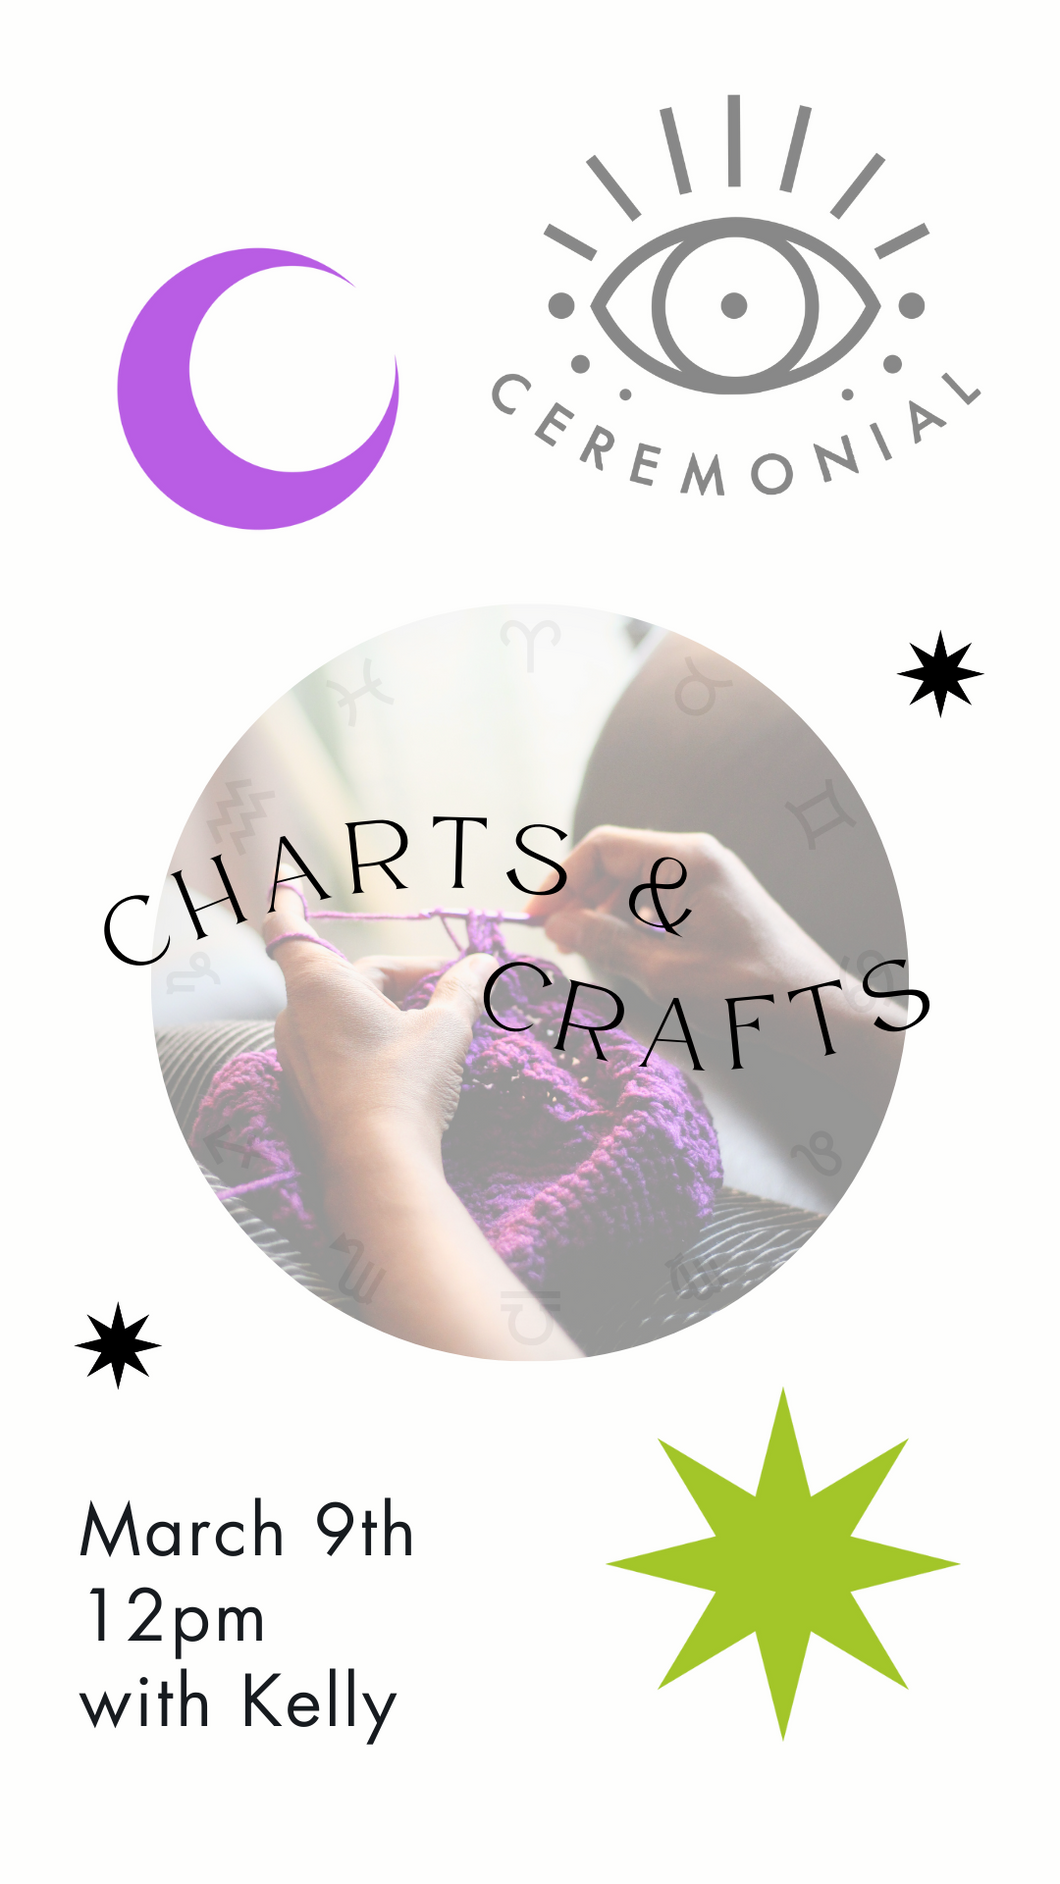 Charts & Crafts, with Kelly, Saturday March 9th 12pm